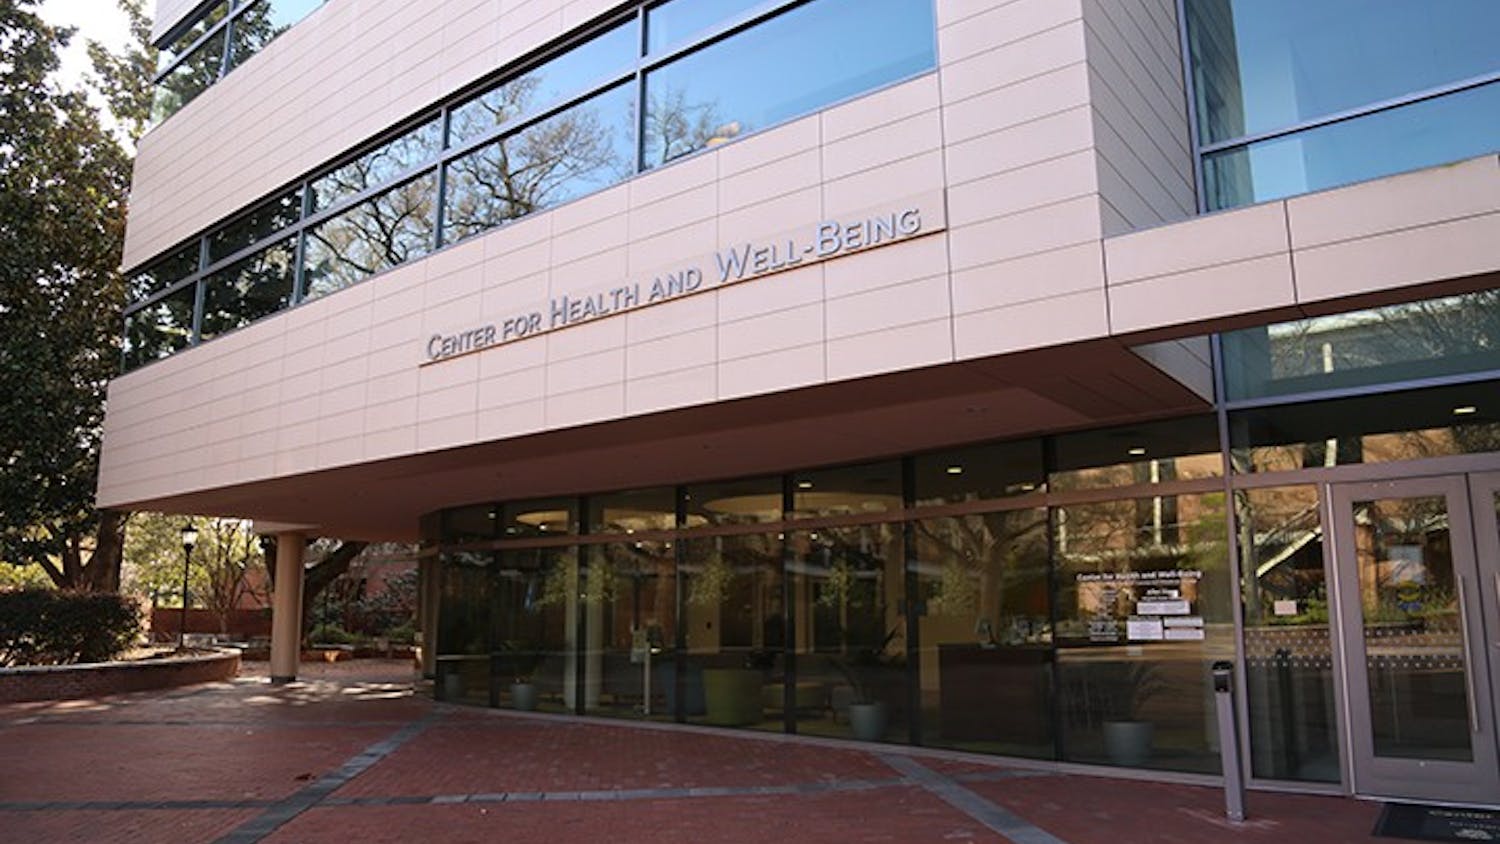 The USC Center for Health and Well-Being was completed in 2017.